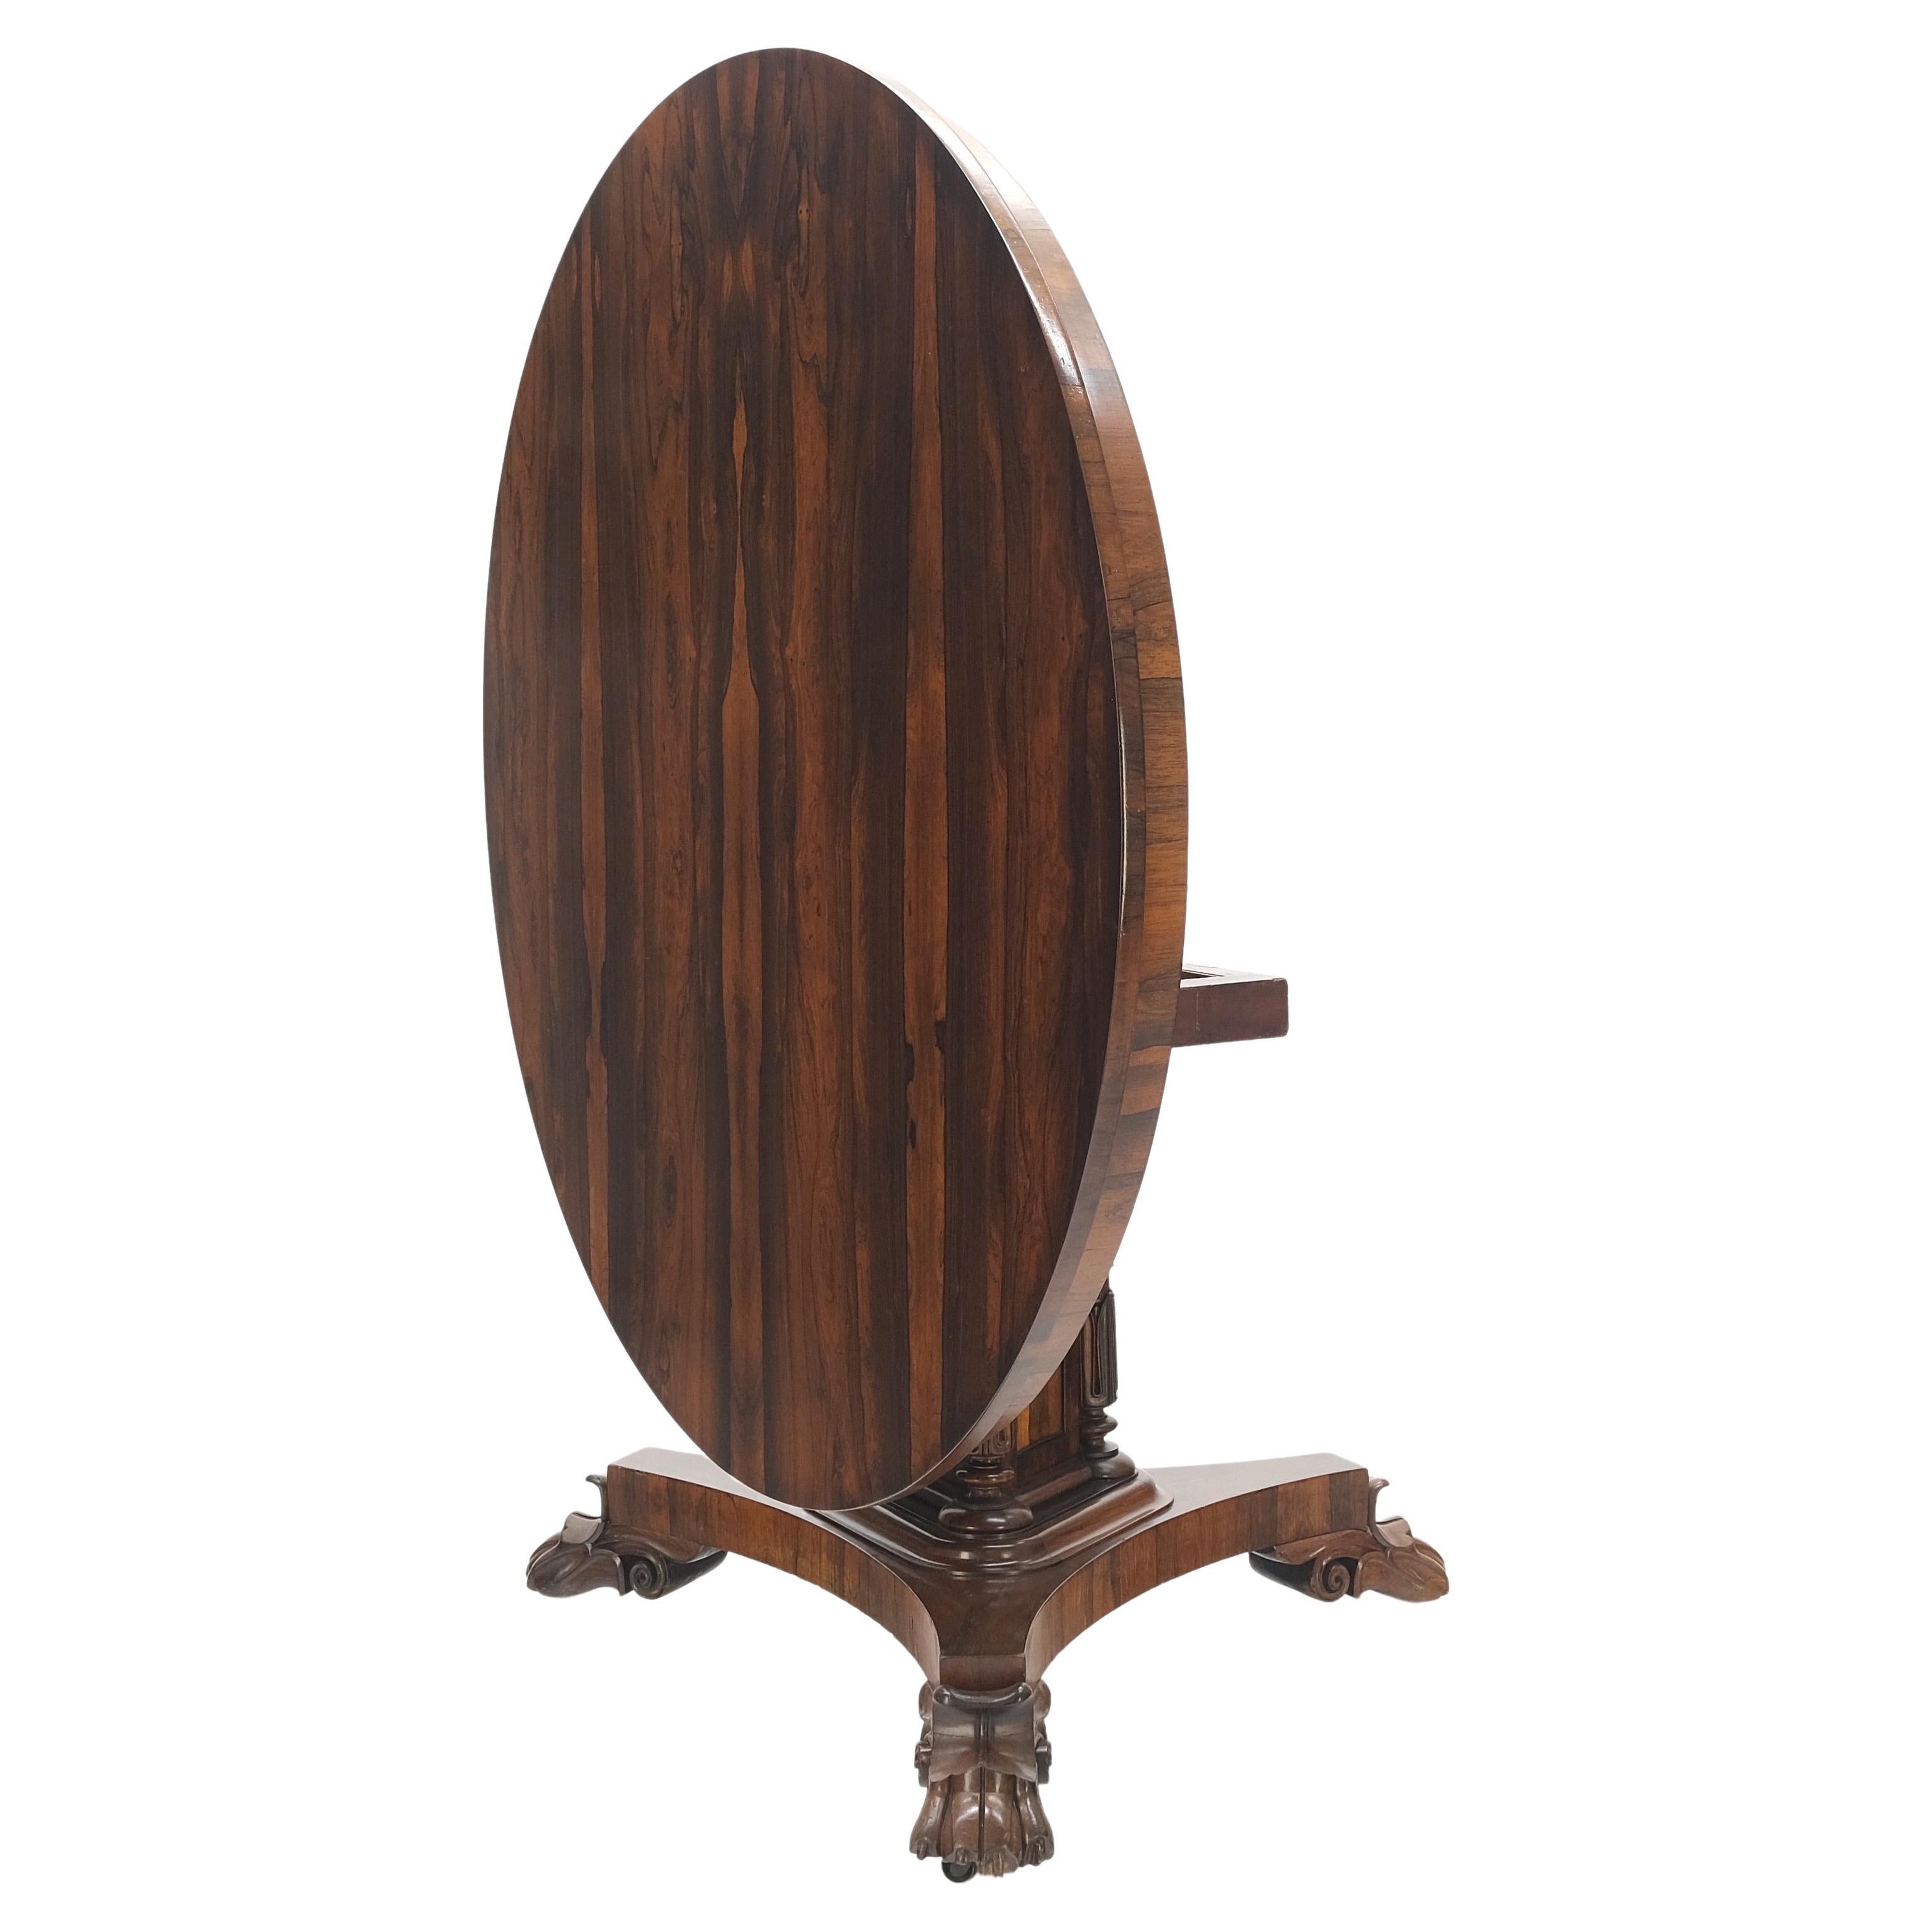 Large 52" Diameter Round Tilt Top Rosewood Empire Dining Breakfast Table MINT! For Sale